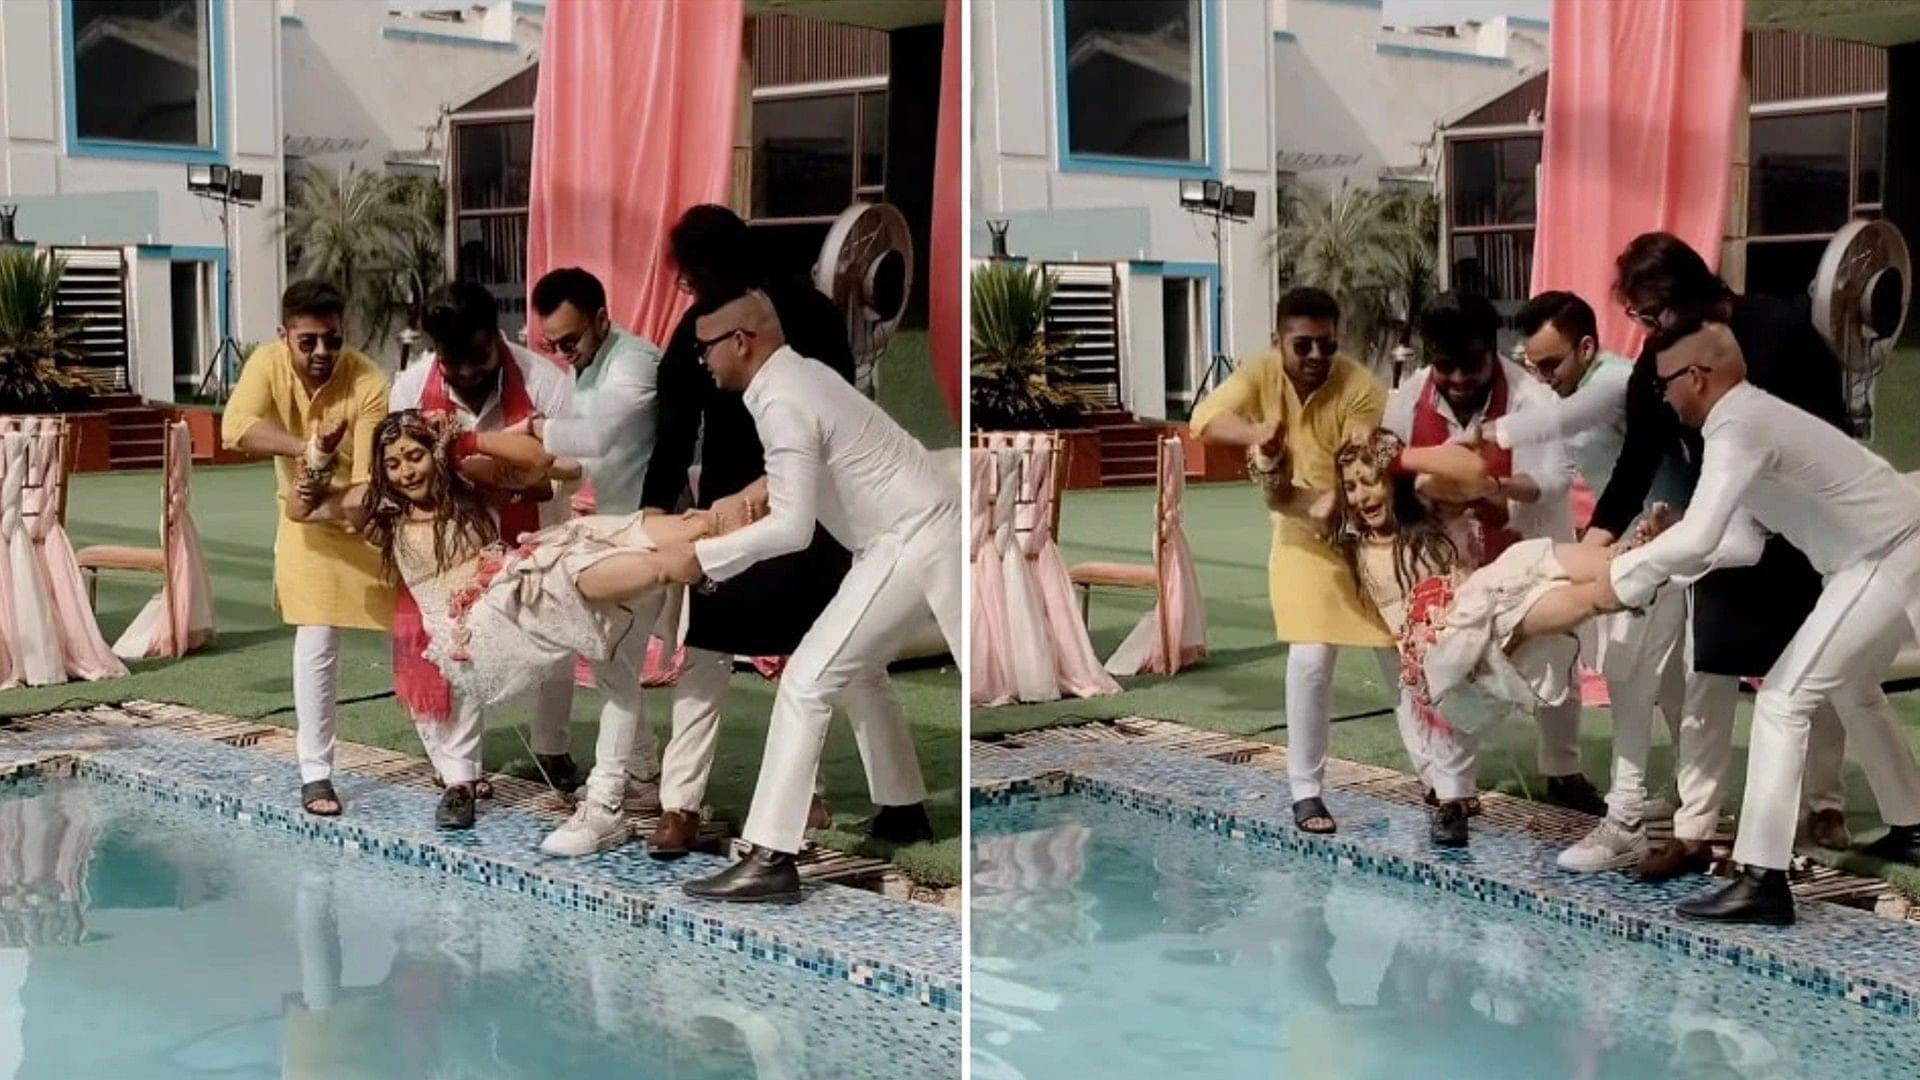 Wedding Video Friends threw bride into swimming pool see viral video